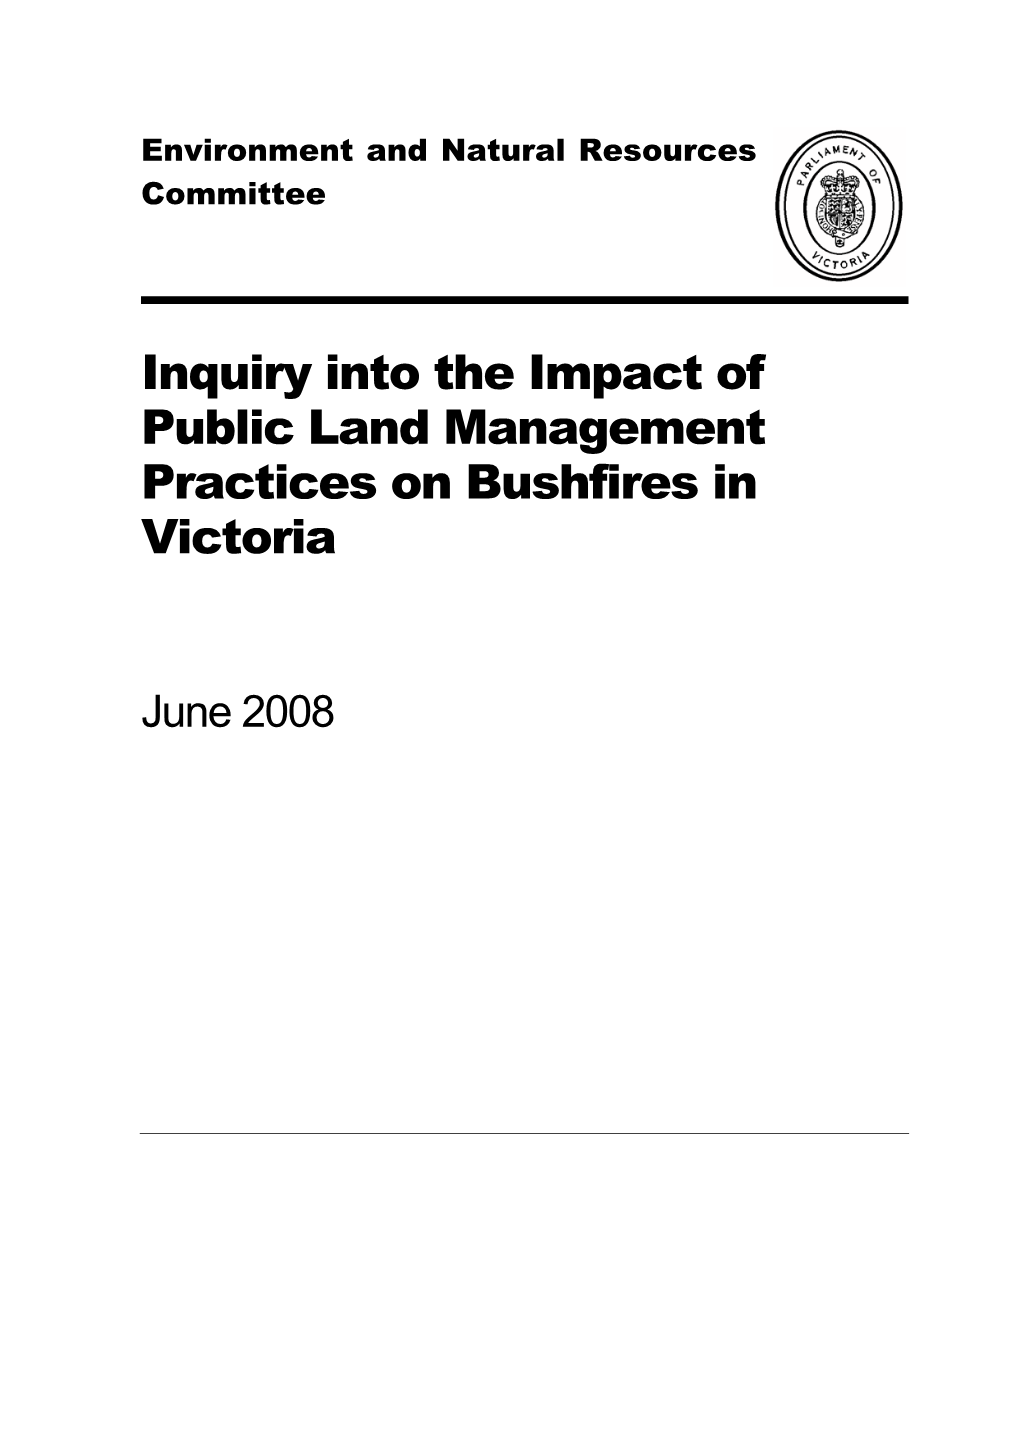 Inquiry Into the Impact of Public Land Management Practices on Bushfires in Victroria, June 2008